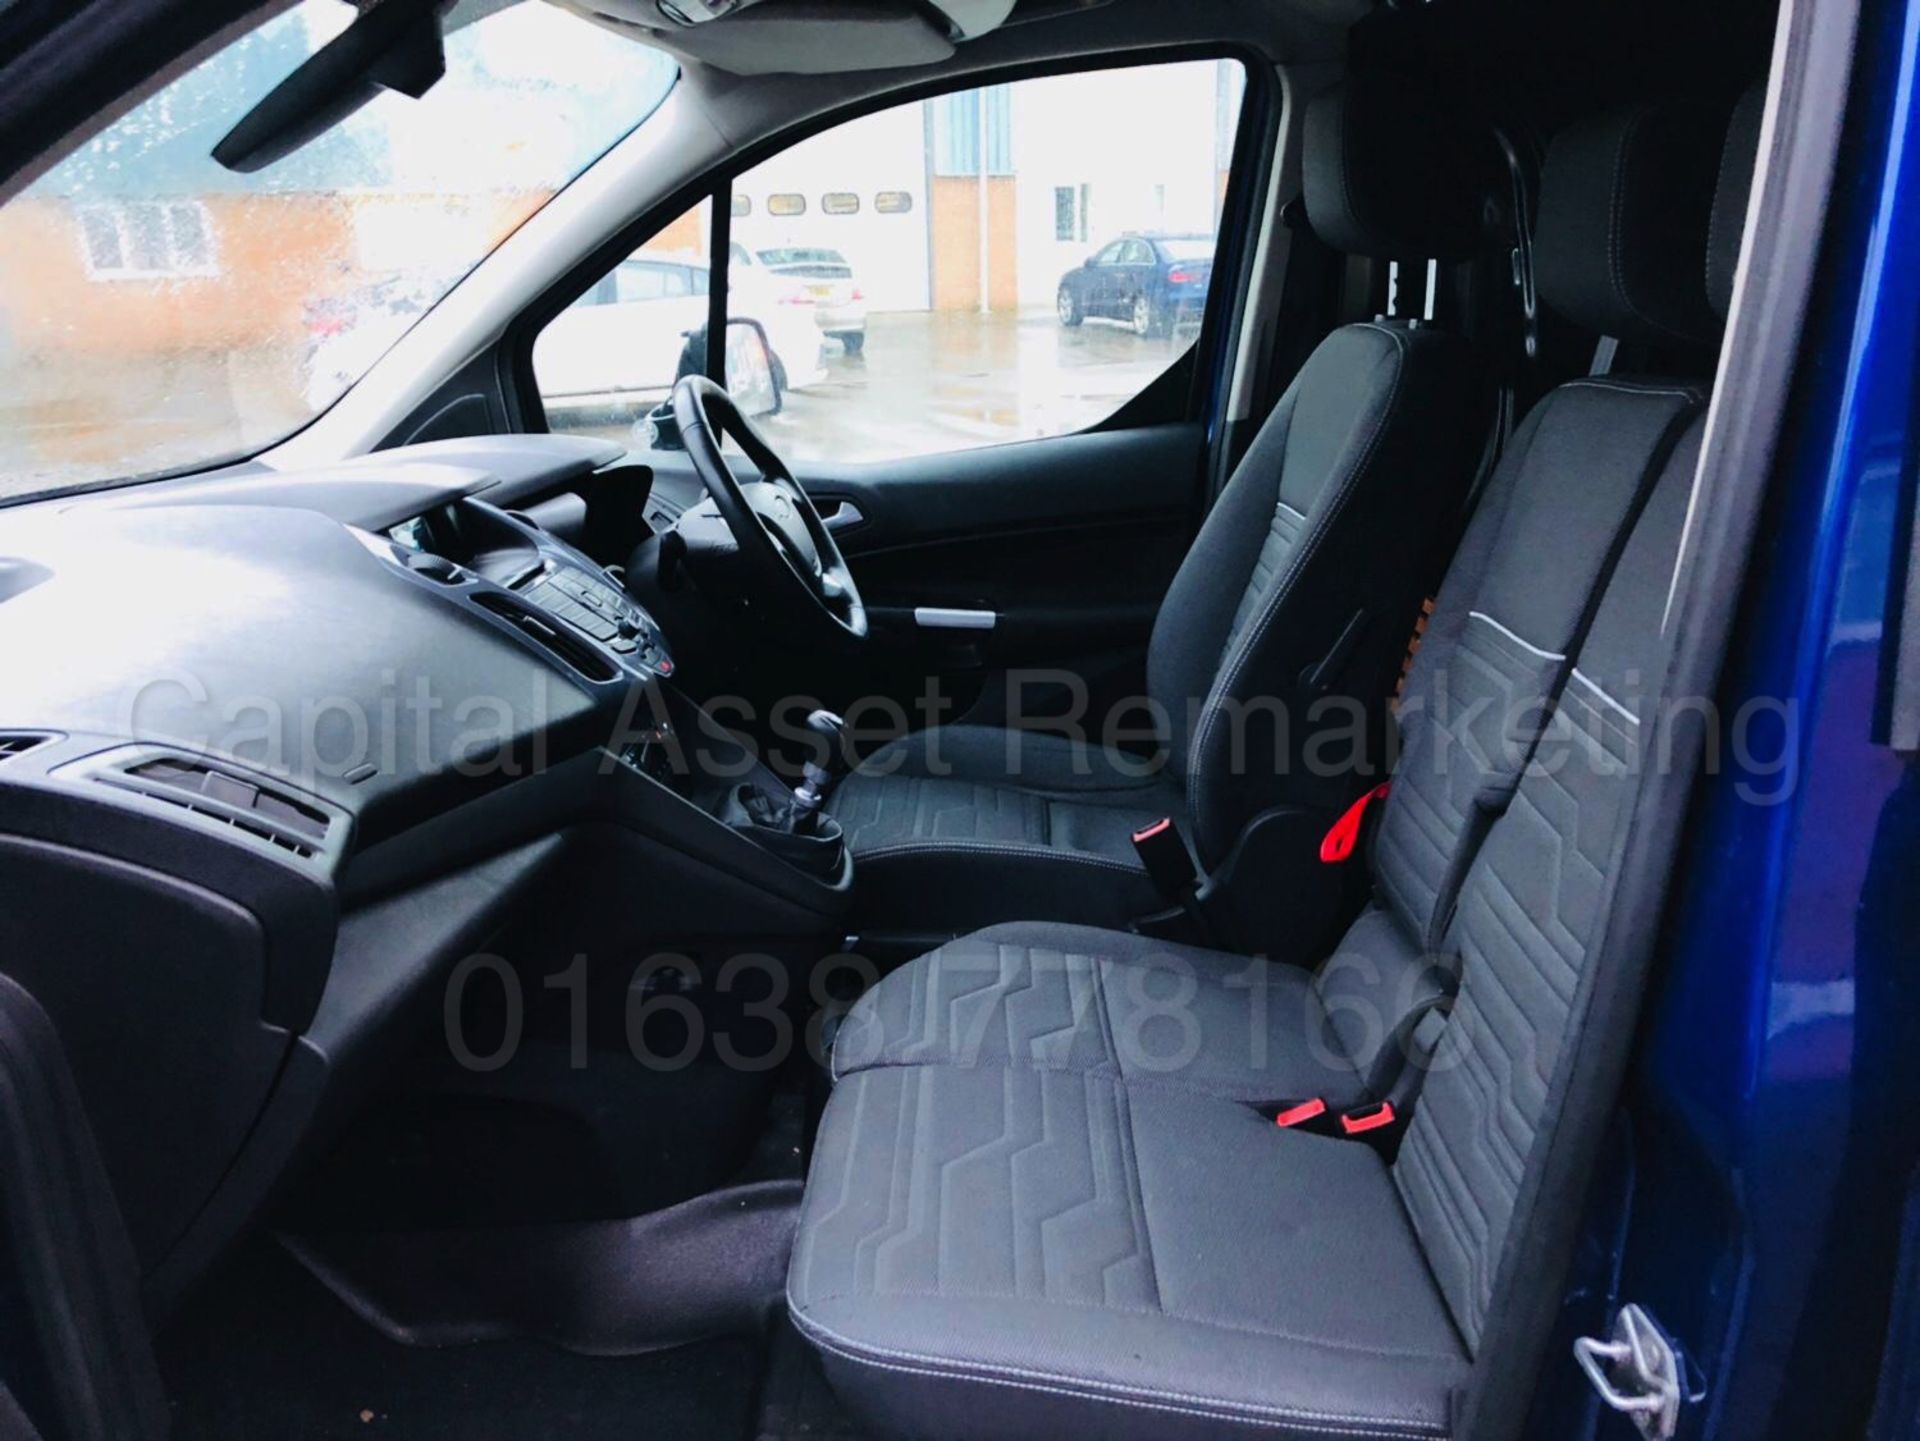 FORD TRANSIT CONNECT 'LIMITED' (2015 - FACELIFT MODEL) '1.6 TDCI - 115 PS - 6 SPEED' *A/C* (1 OWNER) - Image 13 of 28